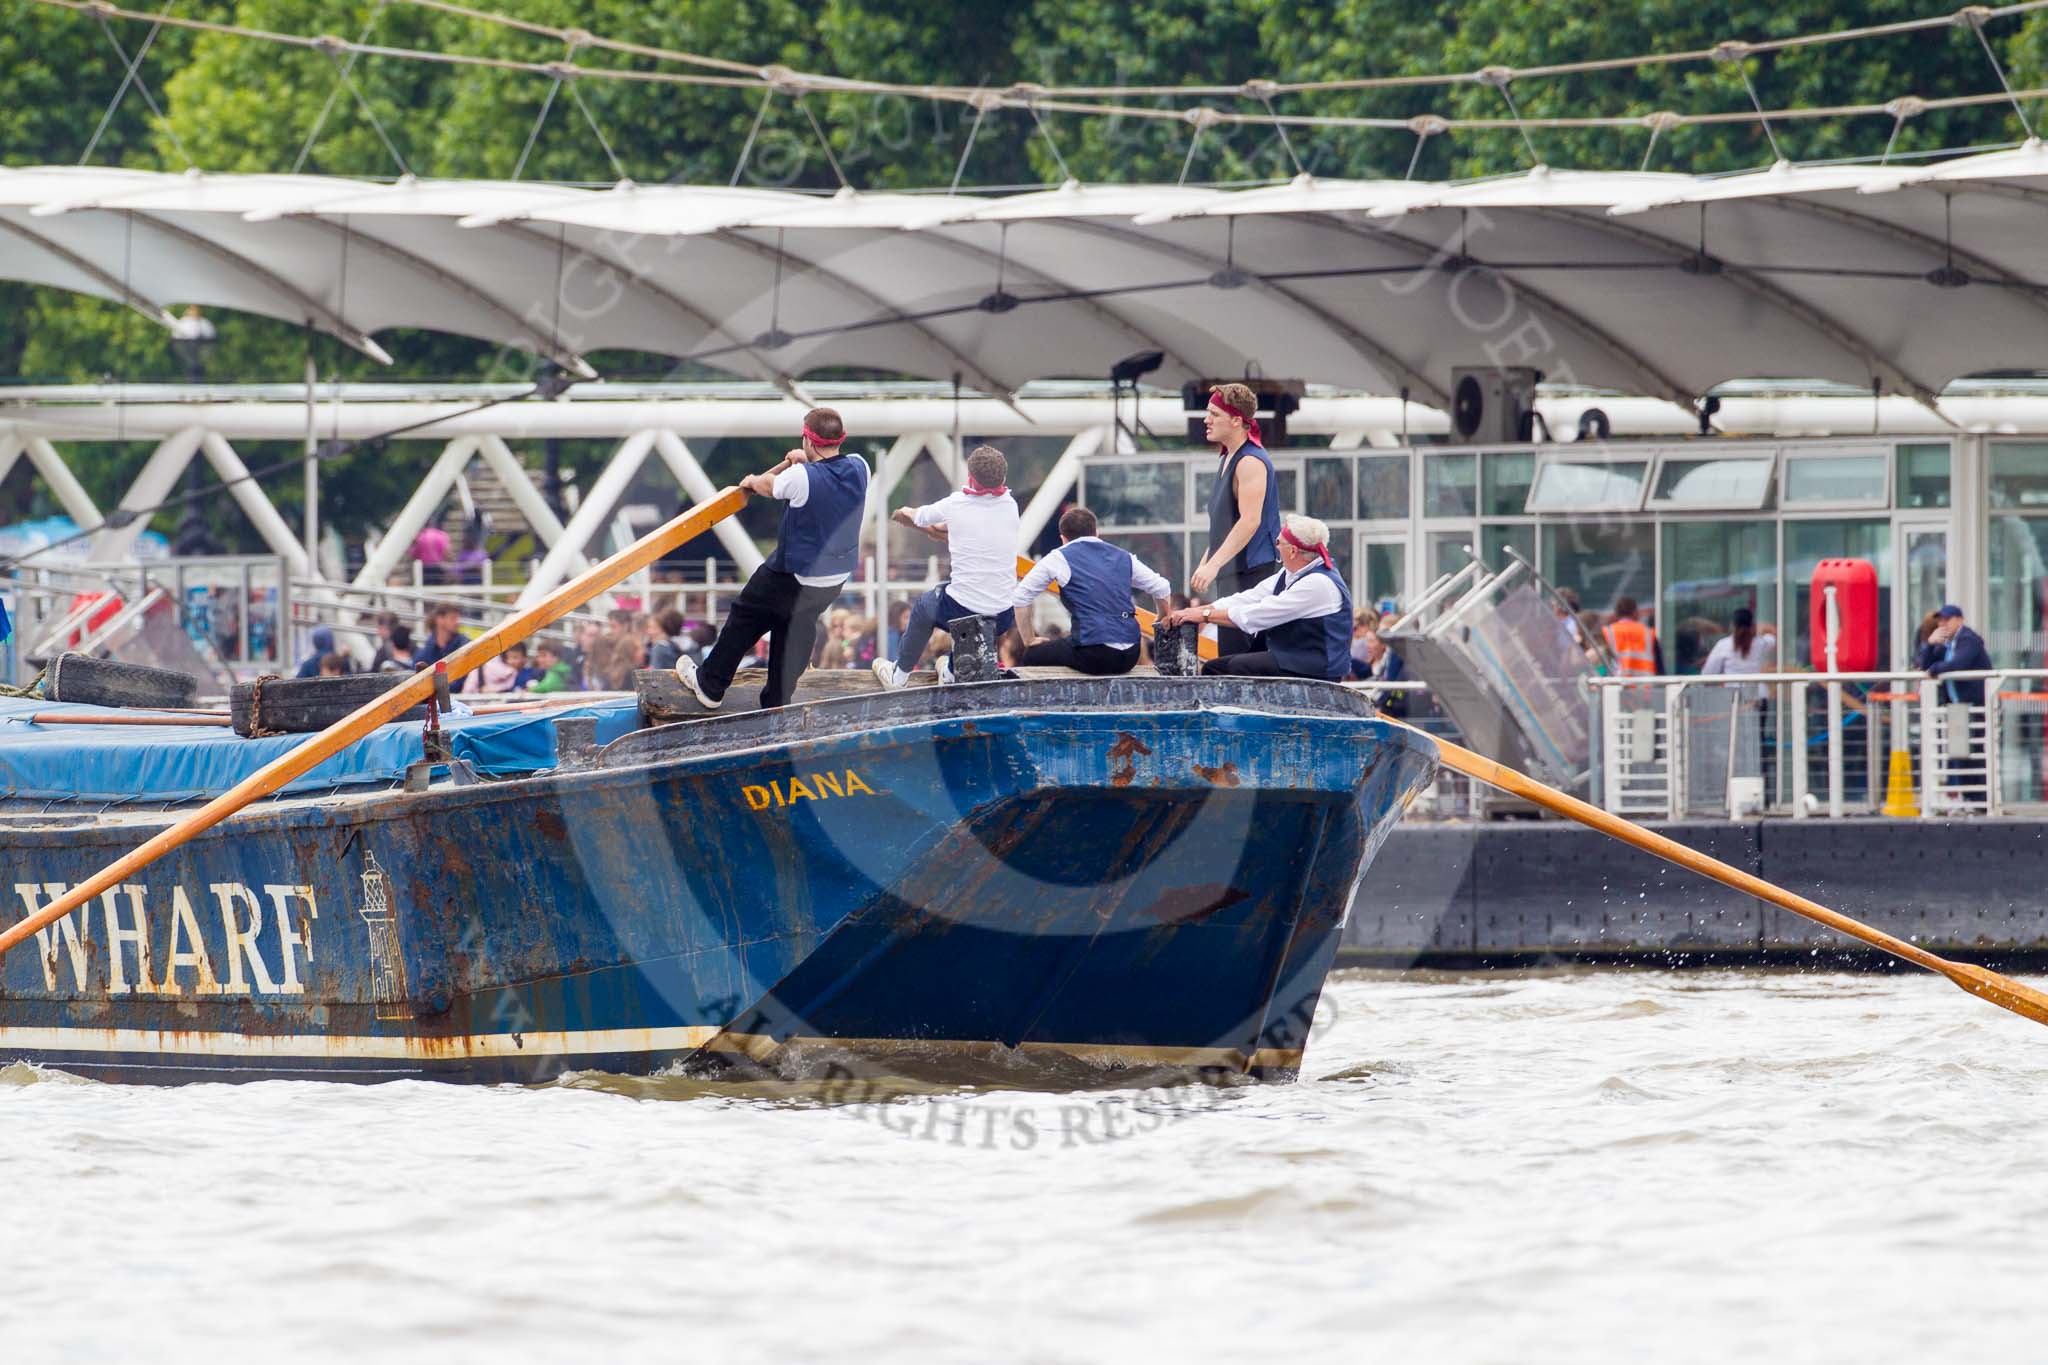 TOW River Thames Barge Driving Race 2014.
River Thames between Greenwich and Westminster,
London,

United Kingdom,
on 28 June 2014 at 14:06, image #368